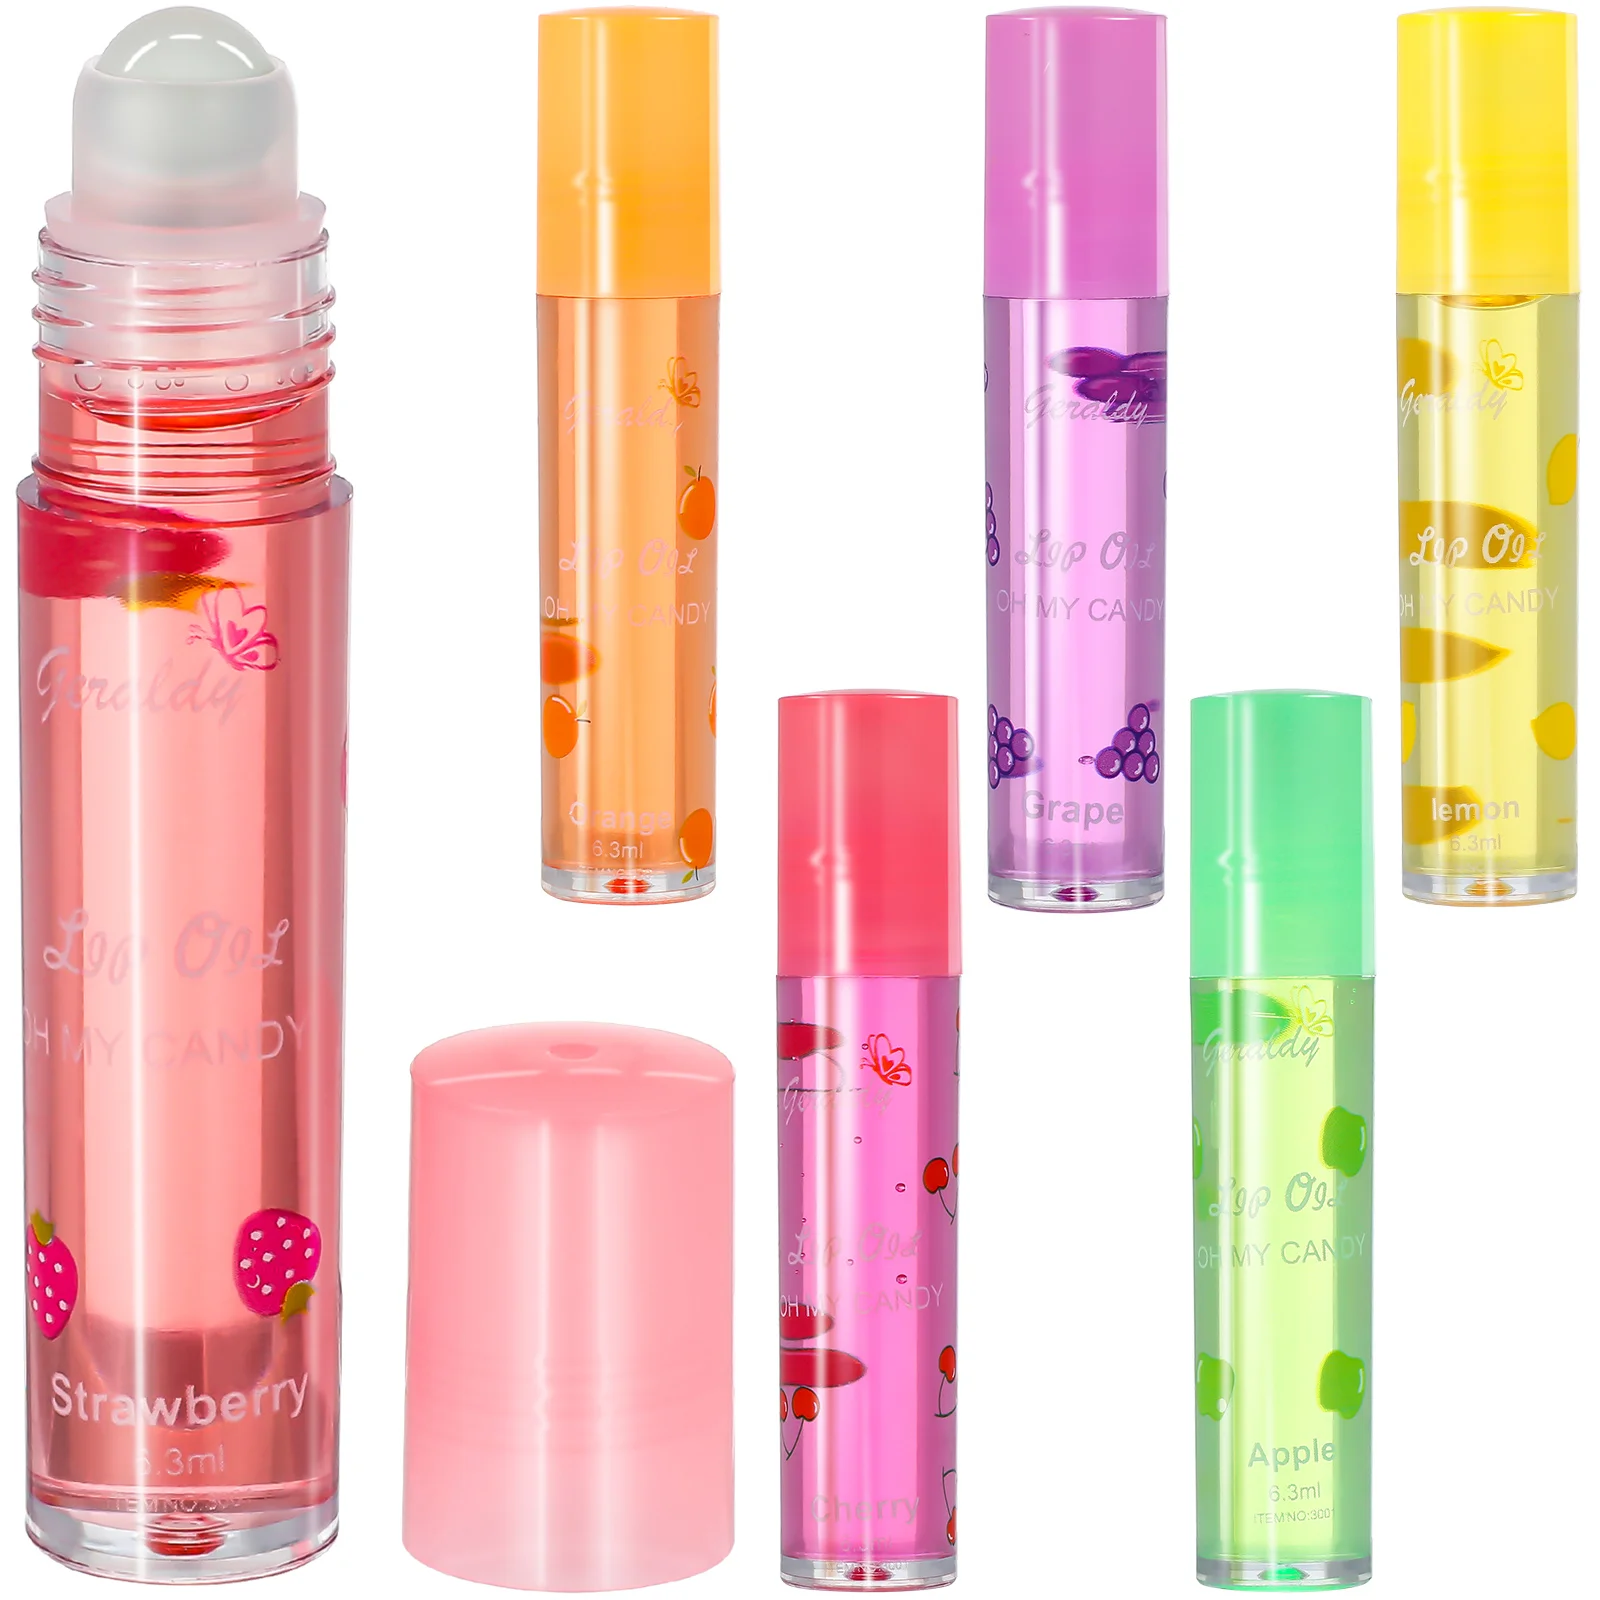 

6 Pcs Luster Lip Protector Color Changing Balm Gloss Kids Transparent Pomade Suite Fruit-flavored Lipstick